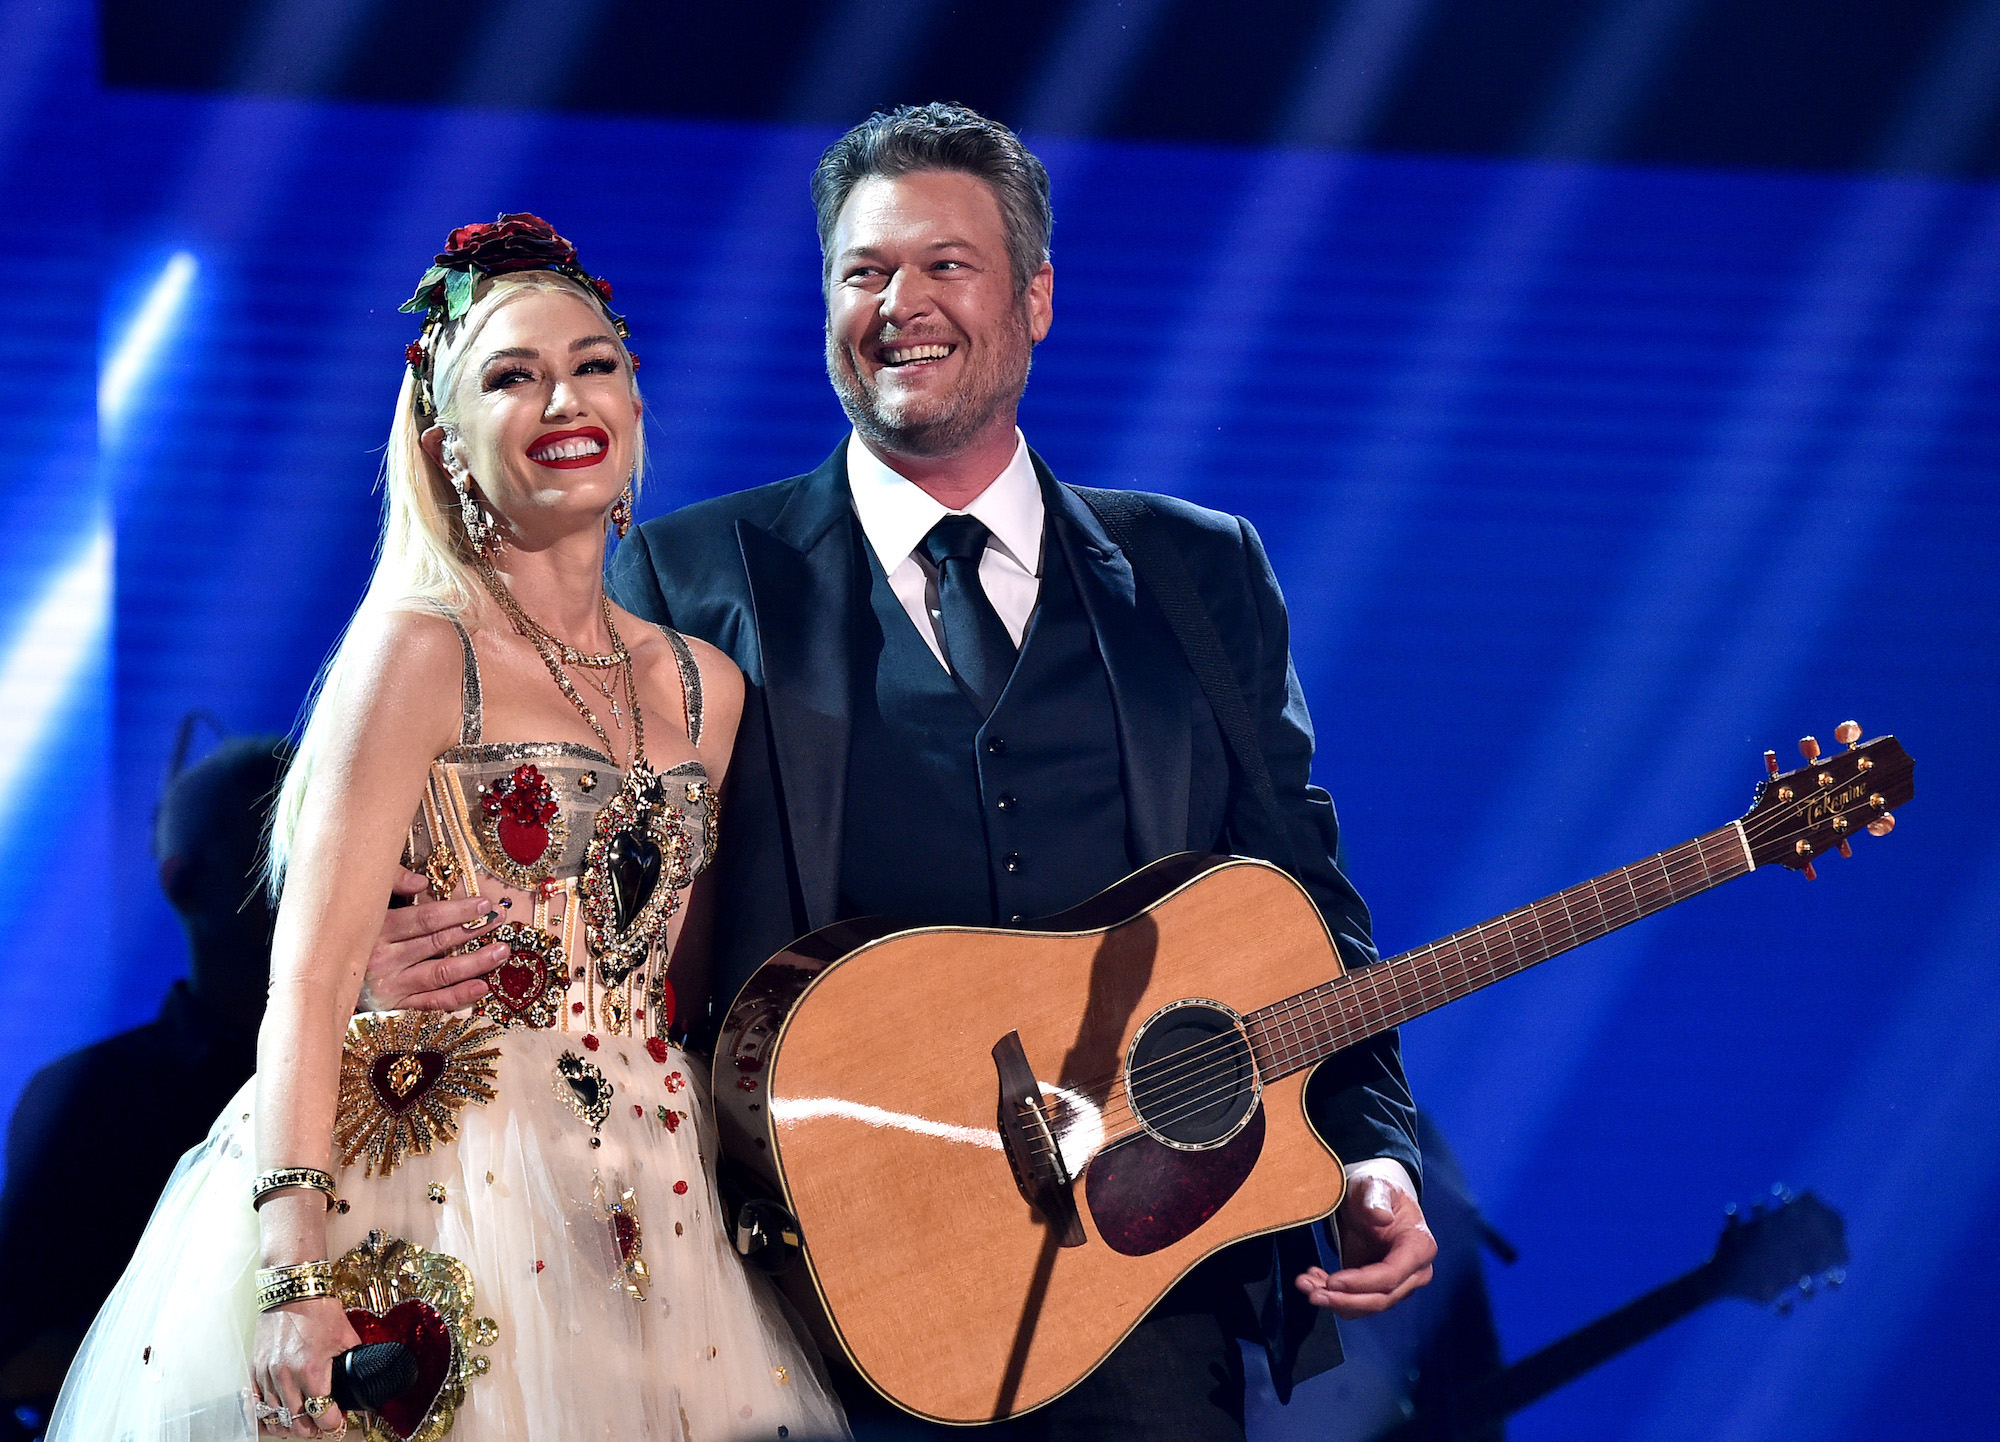 There’s No Proof Blake Shelton and Gwen Stefani Will Spend $10 Million on Their Wedding